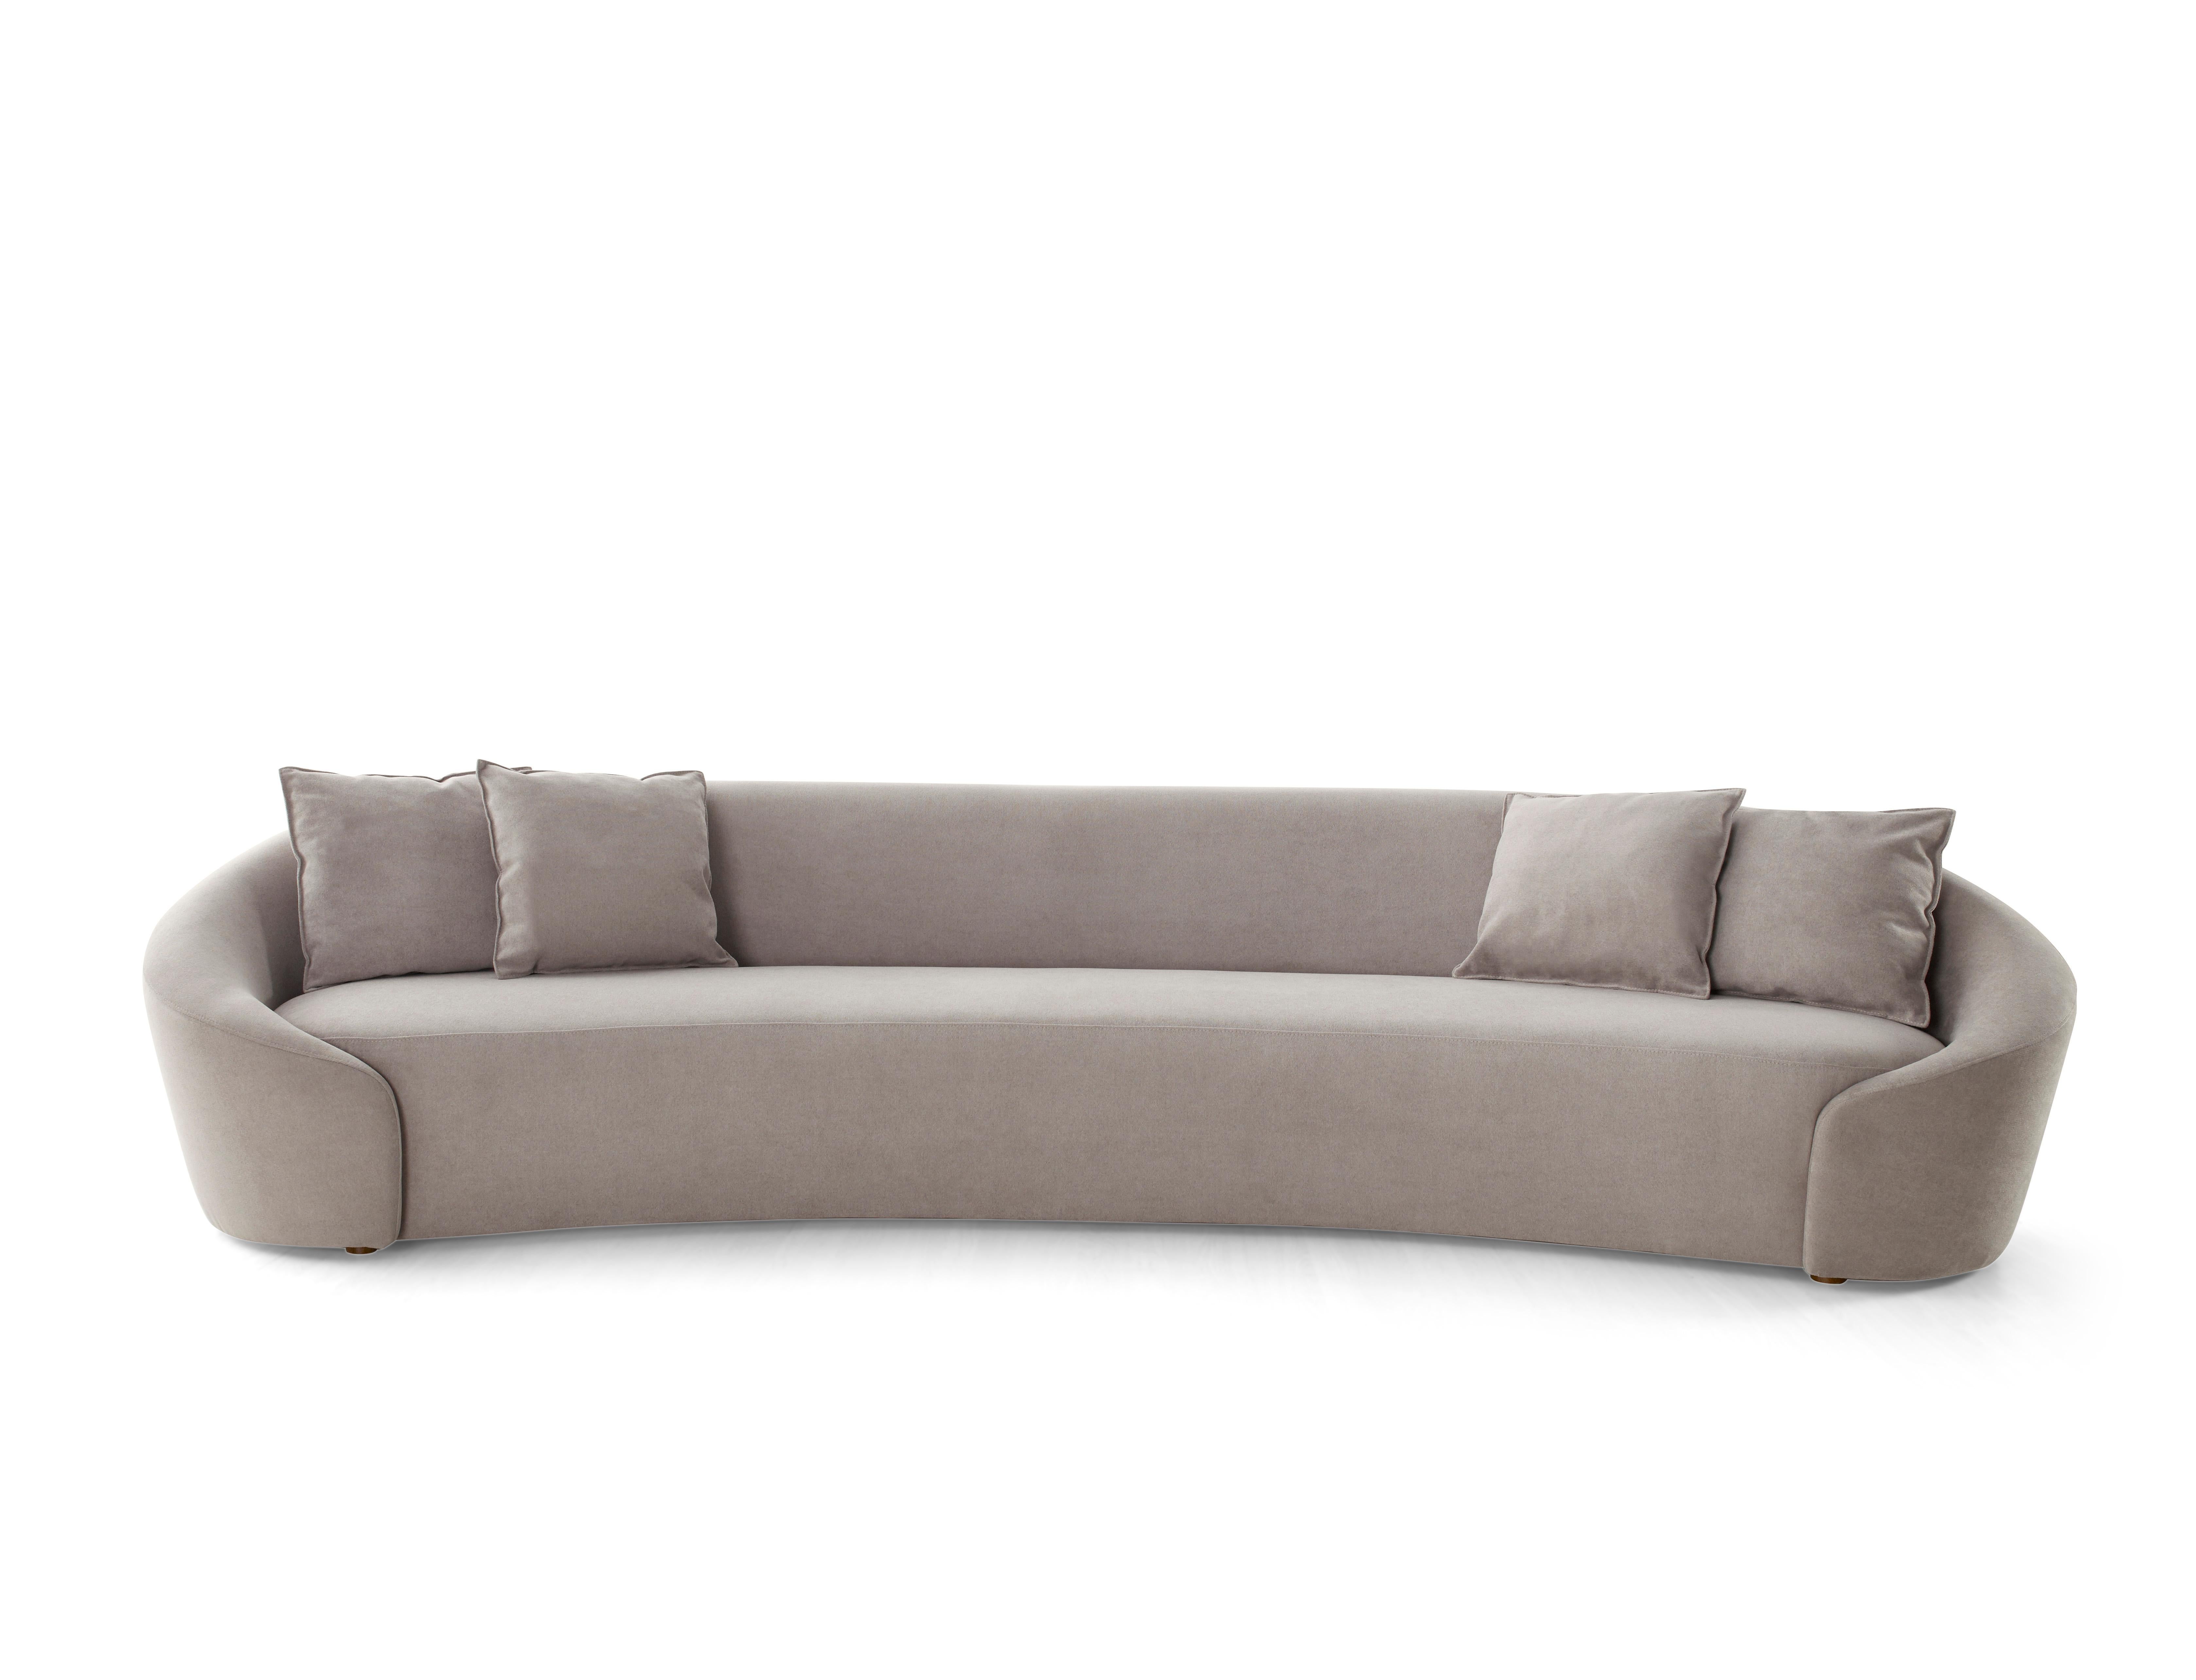 One of the biggest trends, the curved sofa is versatile and can complement both a retro atmosphere and a sophisticated environment.

DOES NOT COME WITH DECORATIVE CUSHIONS
 